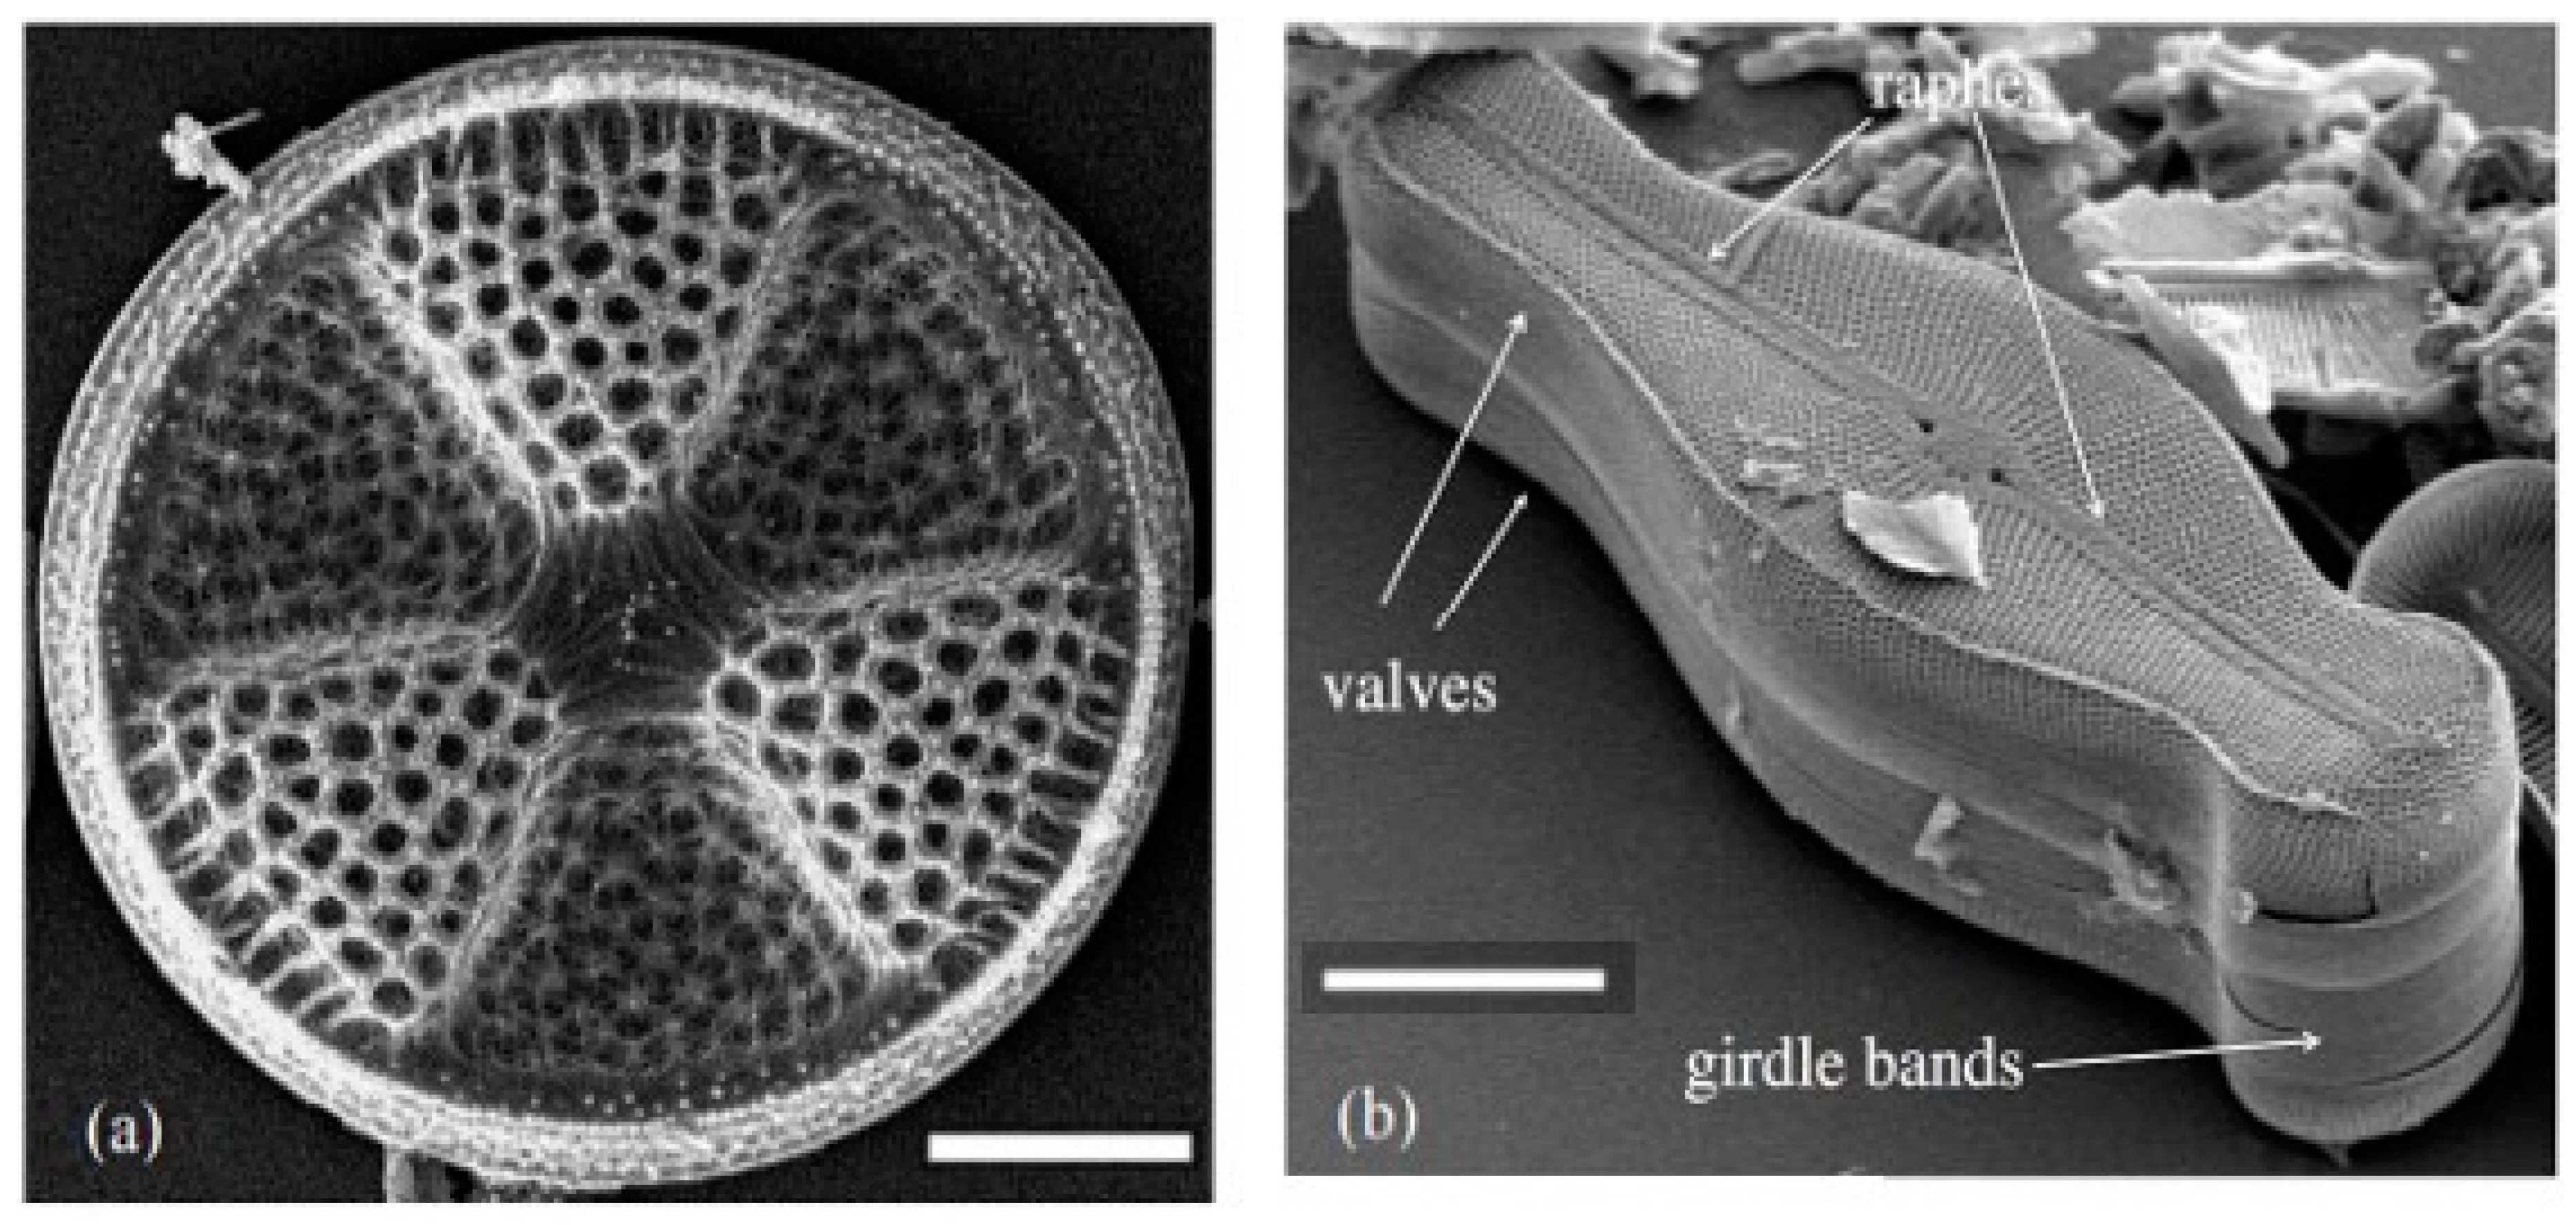 Applied Sciences Free Full Text Nanostructured Biosilica Of Diatoms From Water World To Biomedical Applications Html